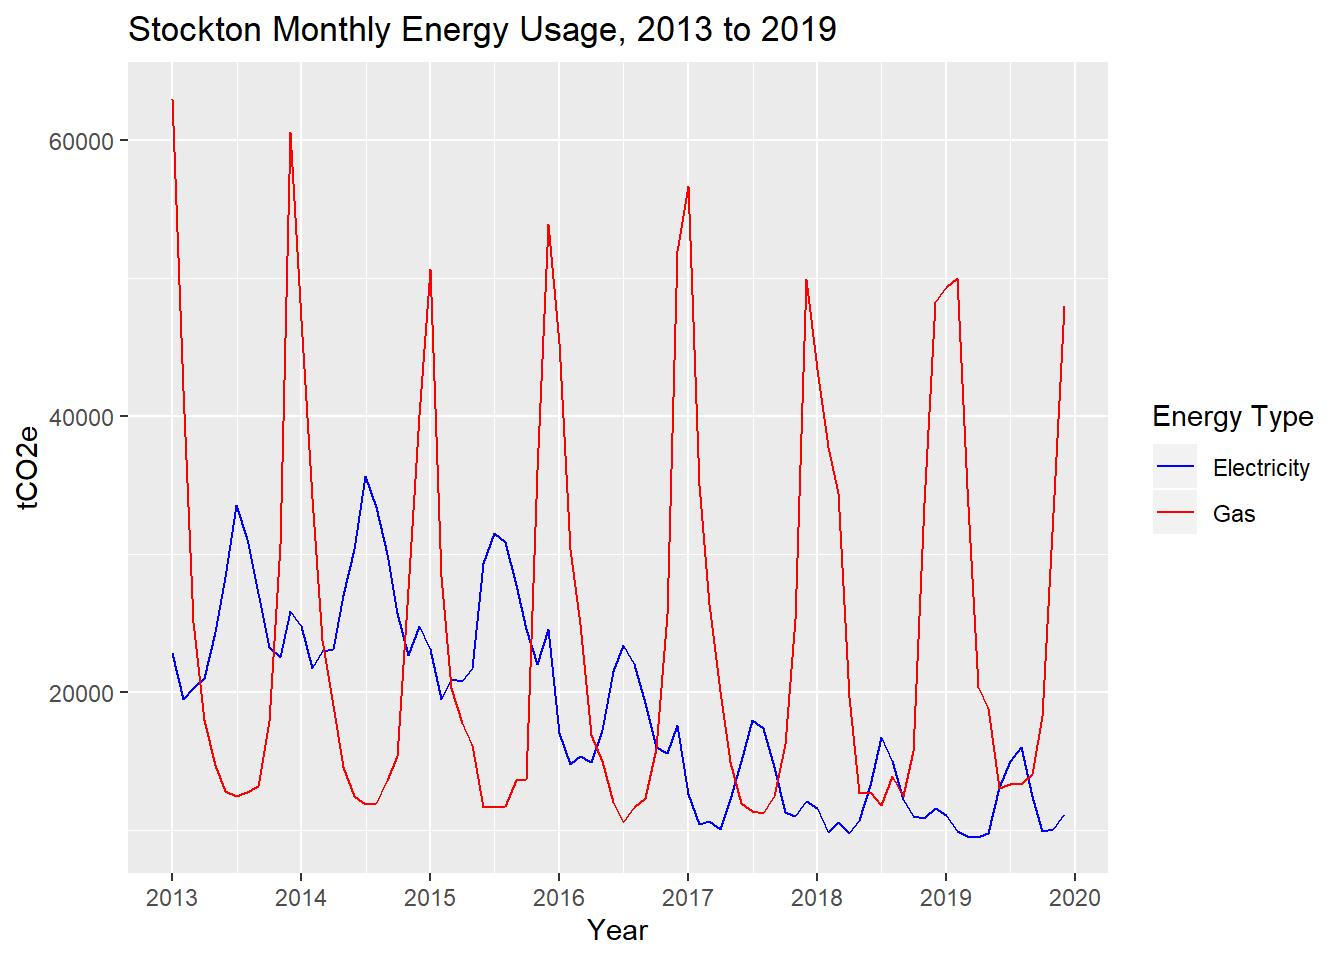 Stockton monthly residential and commercial energy usage, 2013 to 2019, in tCO2e. Data from PG&E.